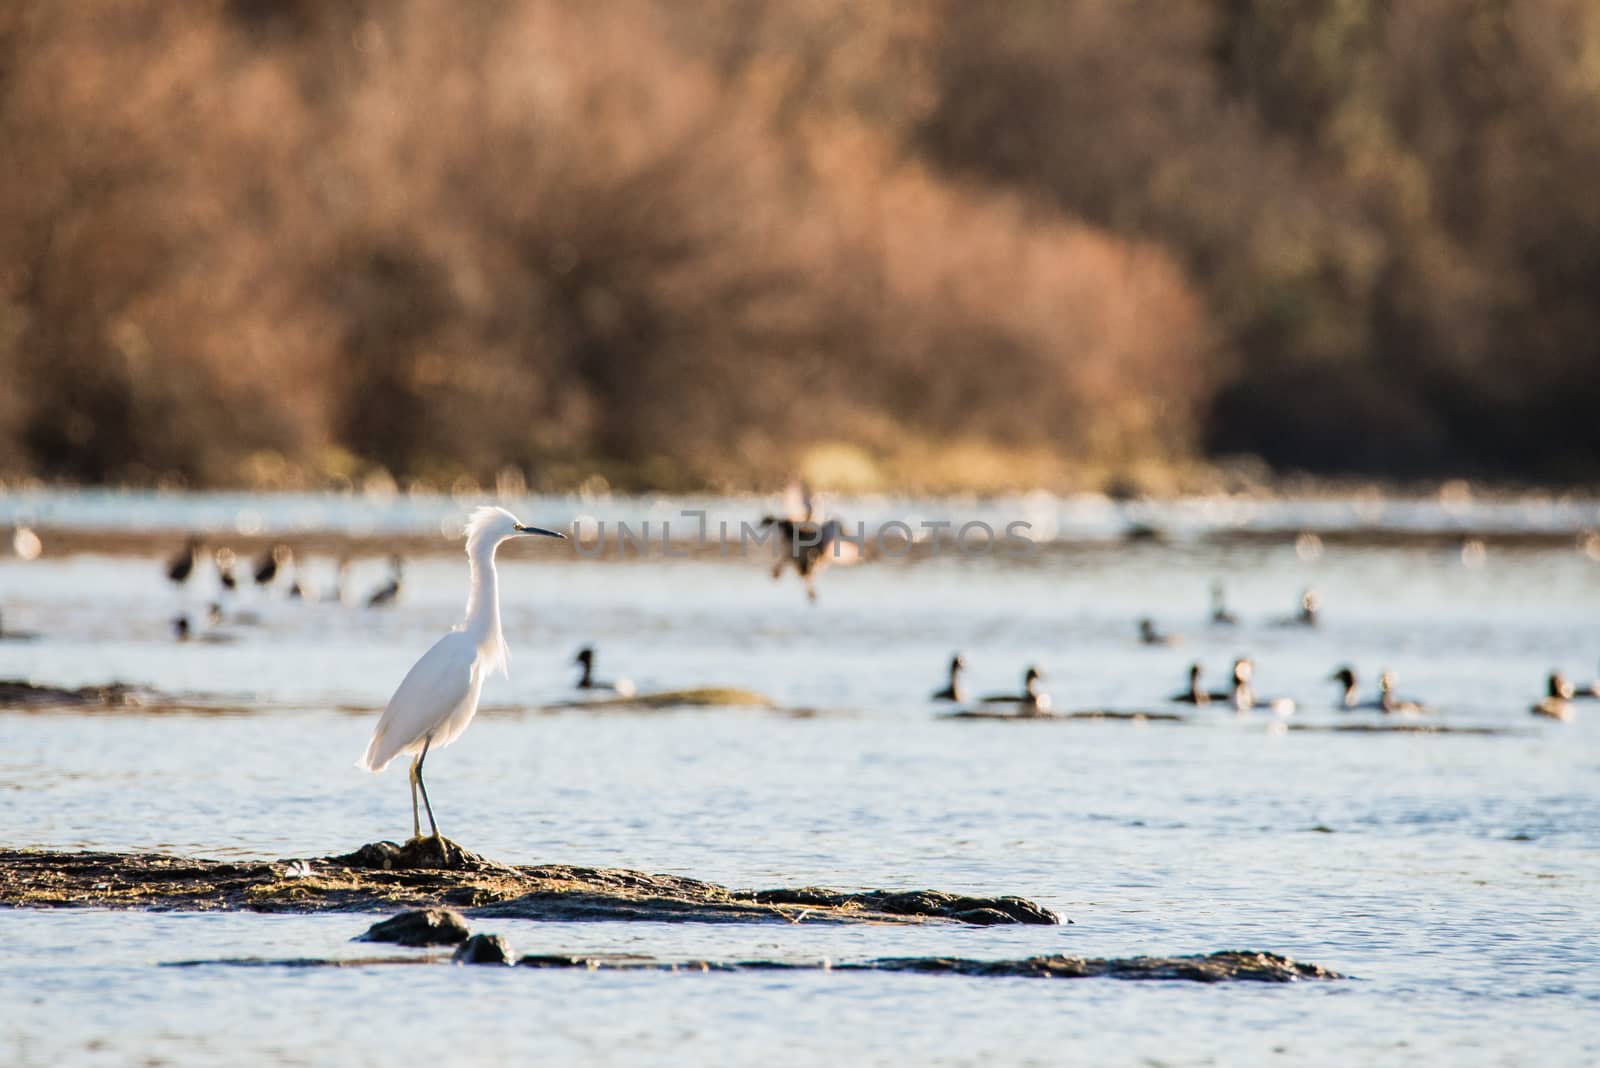 Snowy heron standing still by shallow water to ambush its prey